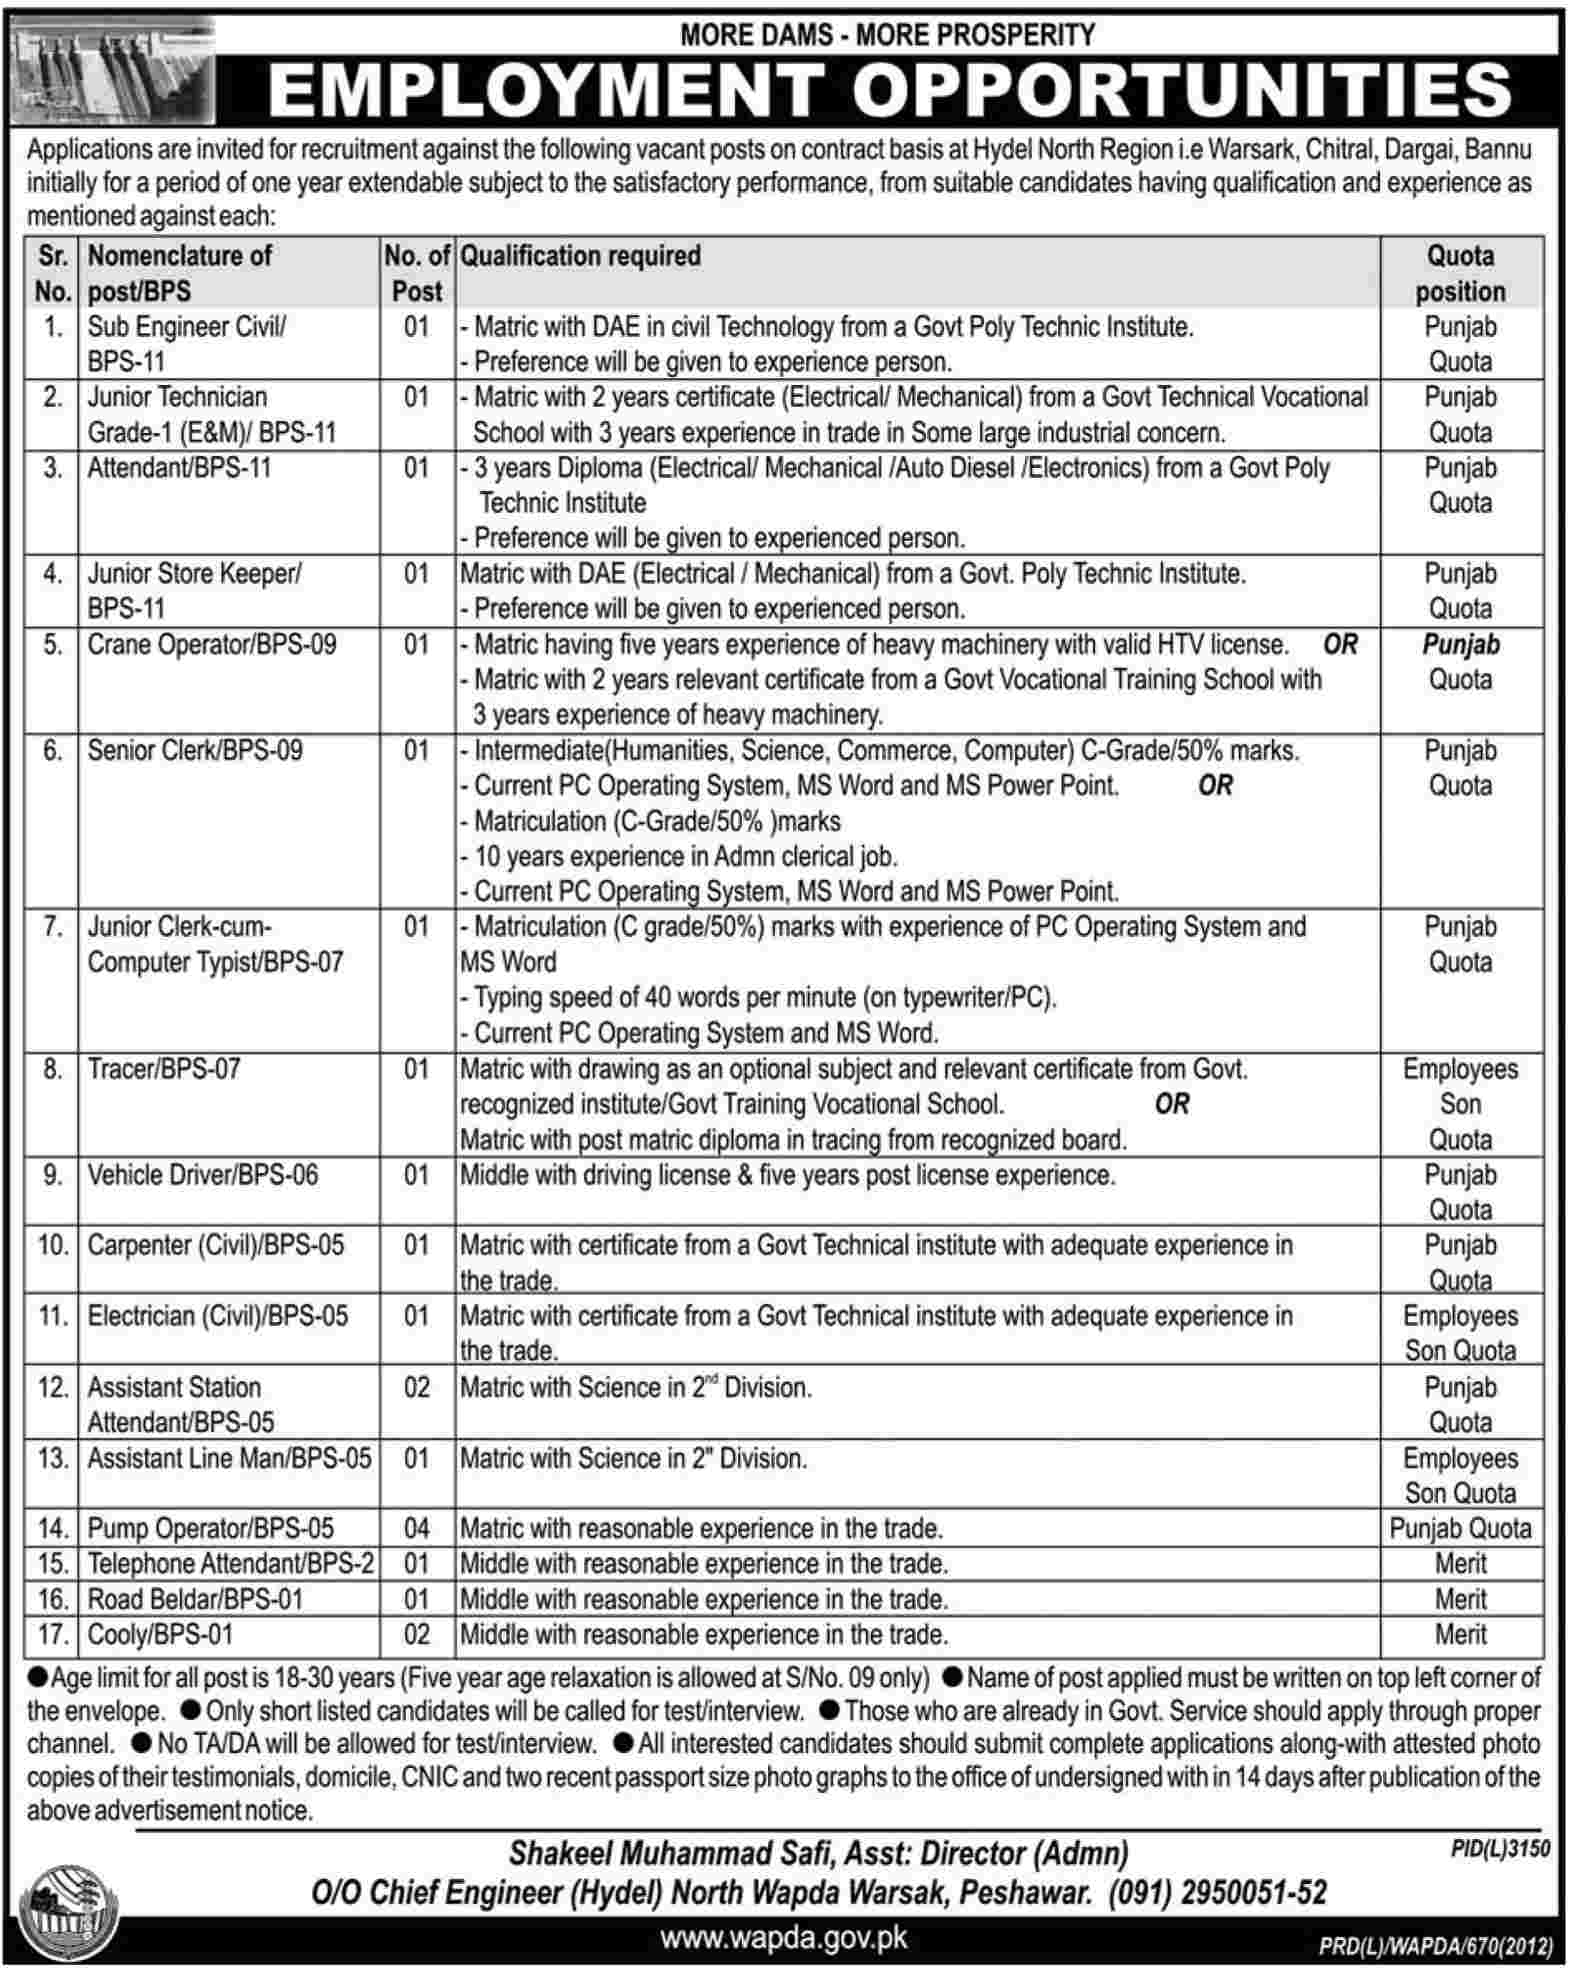 Electricians, Engineering Staff and Drivers Required at Hydel Project (WAPDA Job)